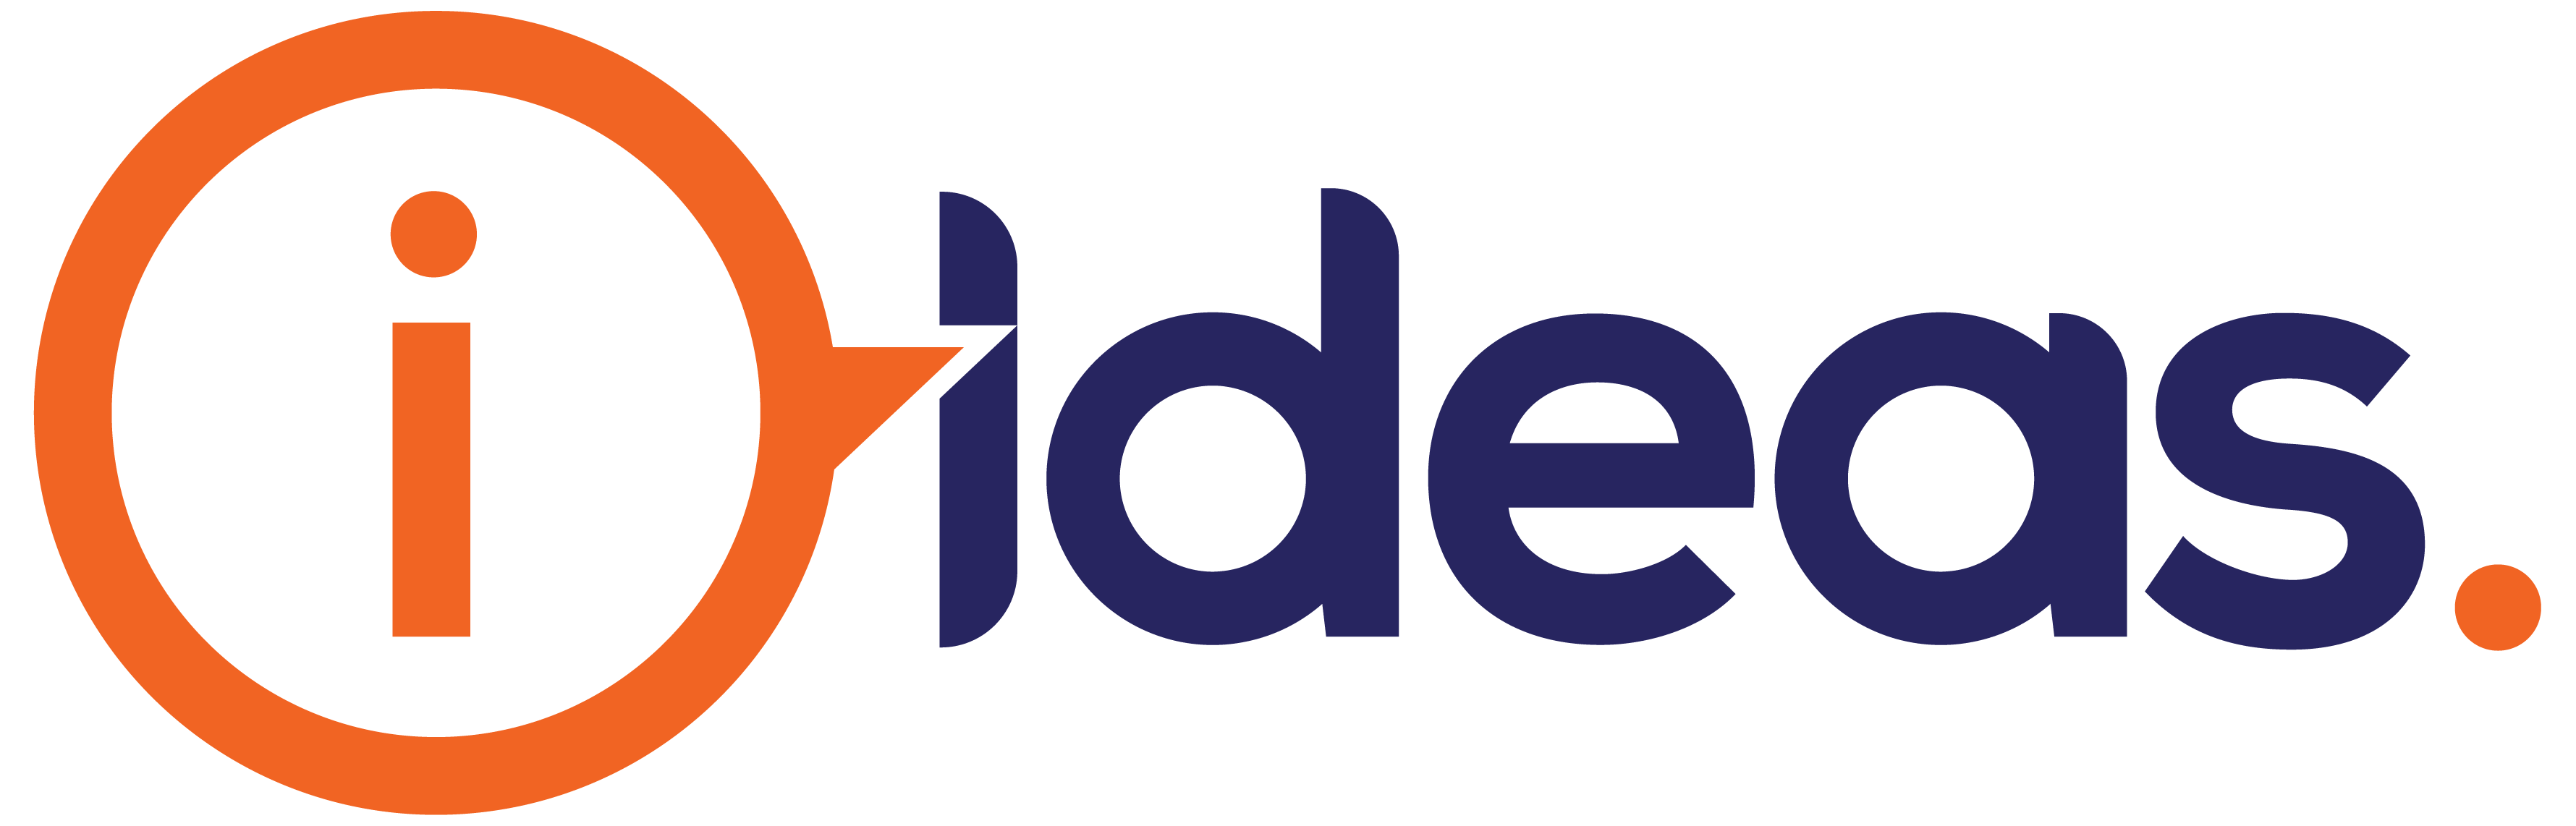 Ideas Logo, a round orange circle with the letter "i" inside and on the right are the letters "Ideas" in blue.